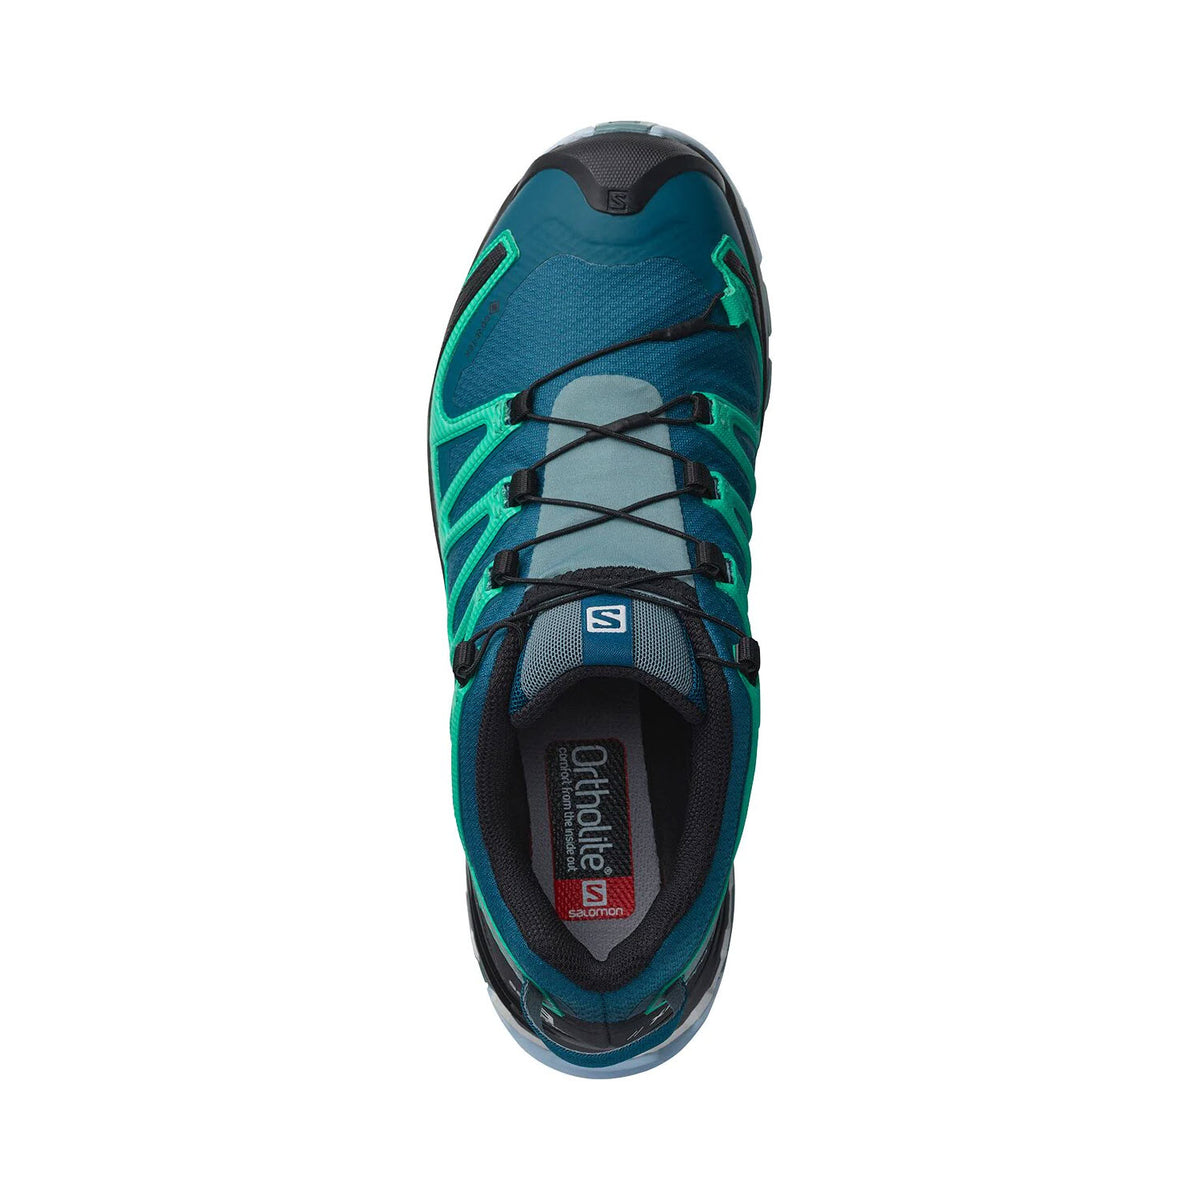 Top view of a blue and green Salomon XA Pro 3D V8 GTX Legion Blue shoe with black laces, isolated on a white background.